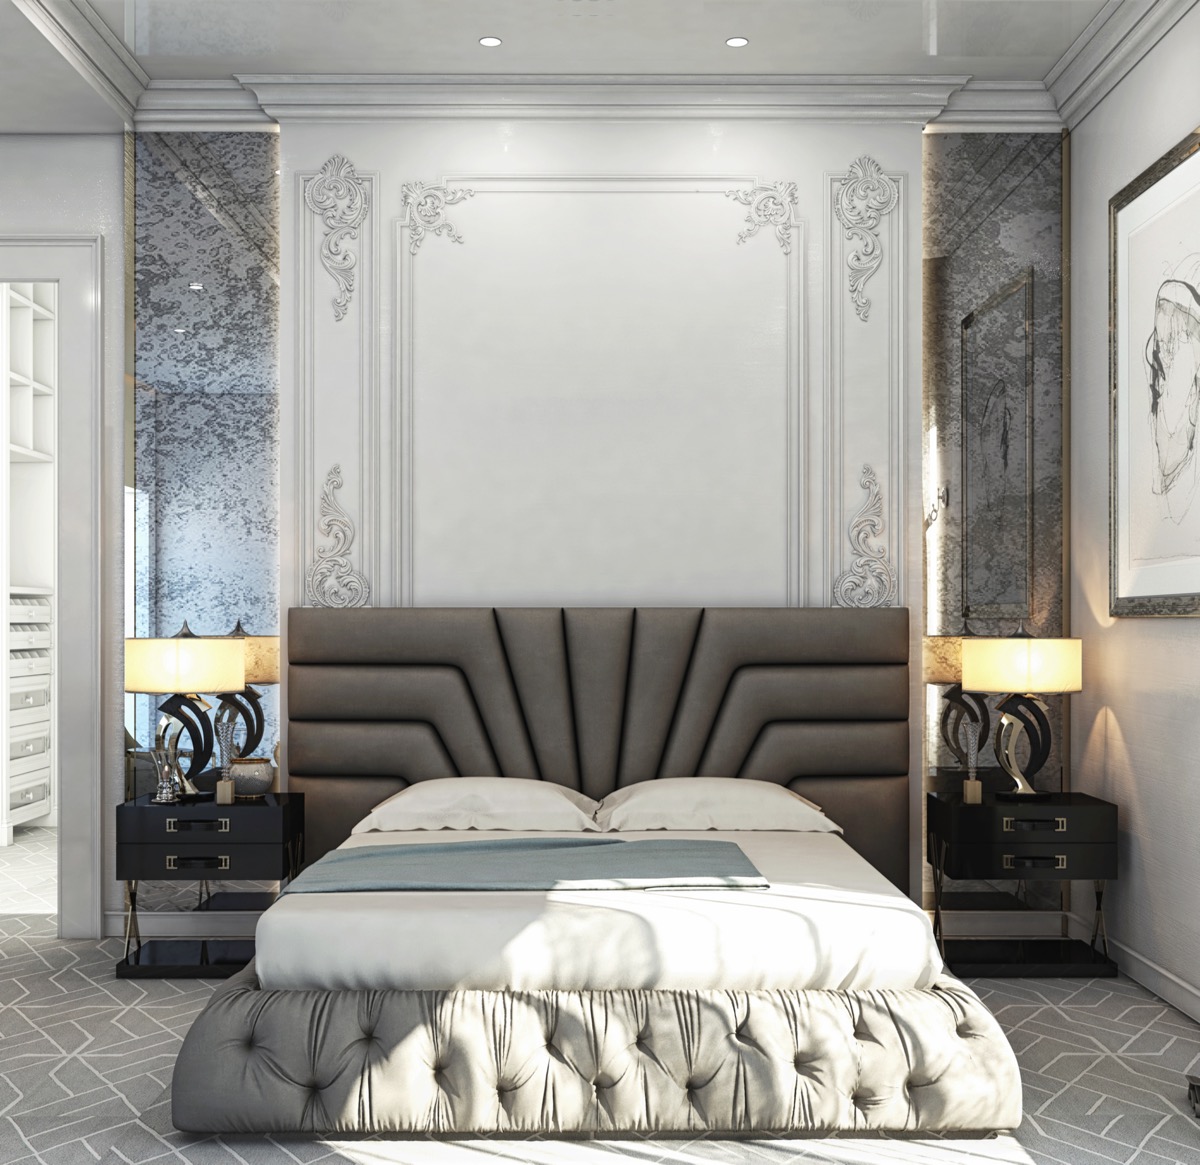 51 Luxury Bedrooms With Images, Tips & Accessories To Help You ...